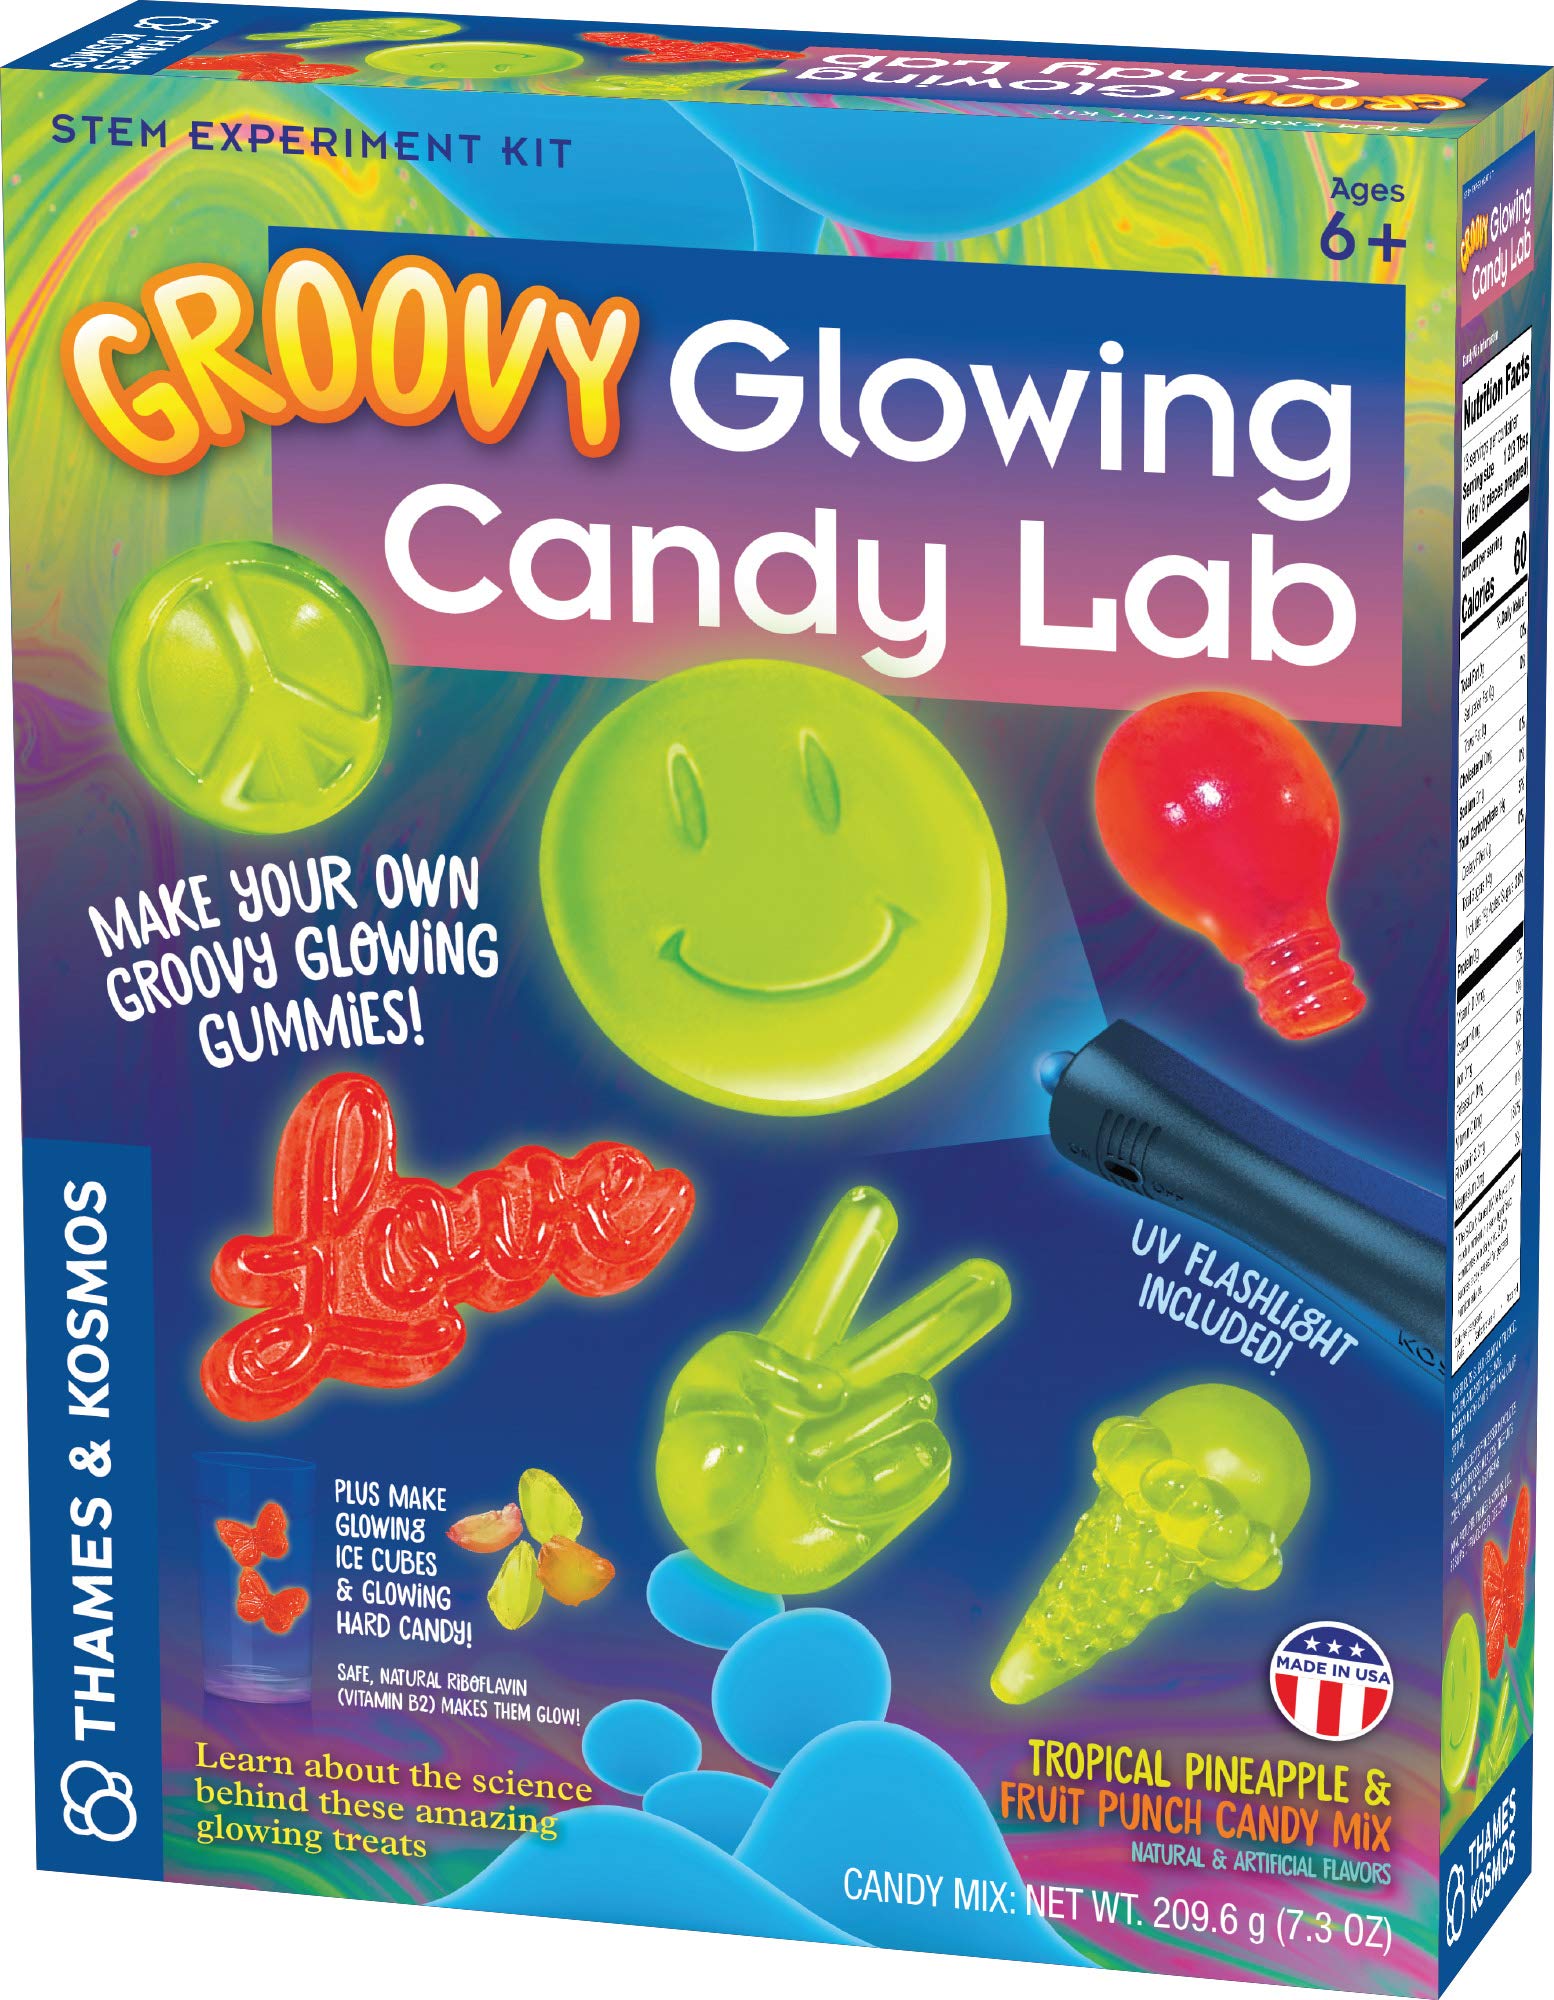 Thames & Kosmos Rainbow Gummy Candy Lab - Unicorns, Clouds & Rainbows! Sweet Science STEM Experiment Kit, Make Your Own Gummy Candies in Cool Shapes & Colors